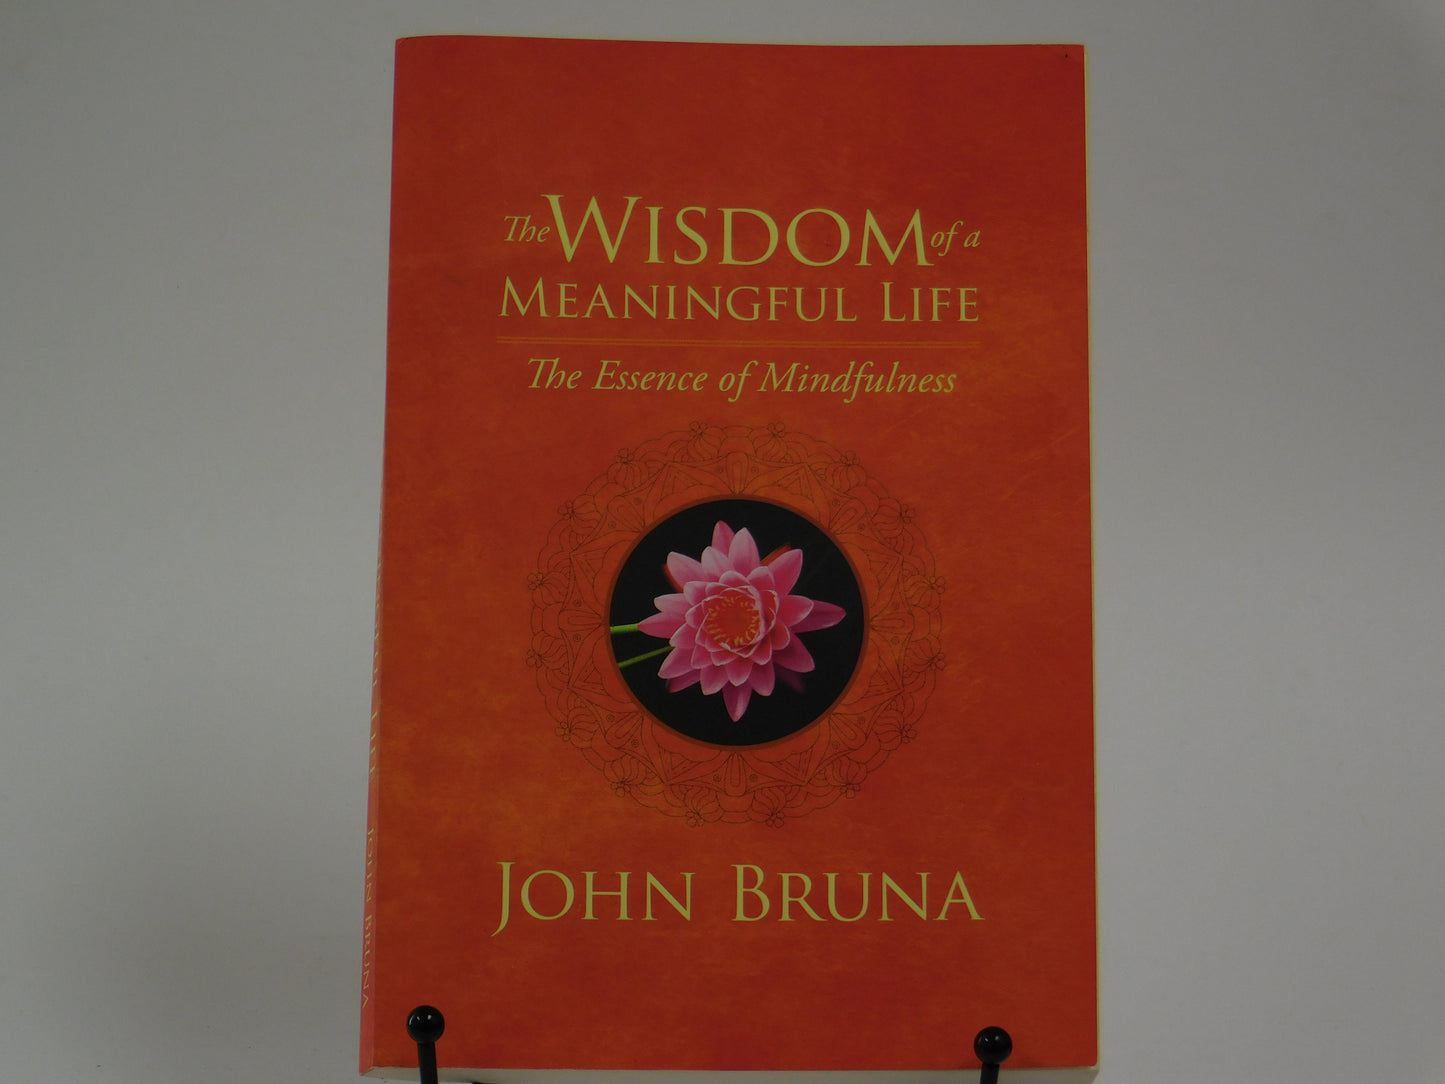 The Wisdom of a Meaningful Life by John Bruna